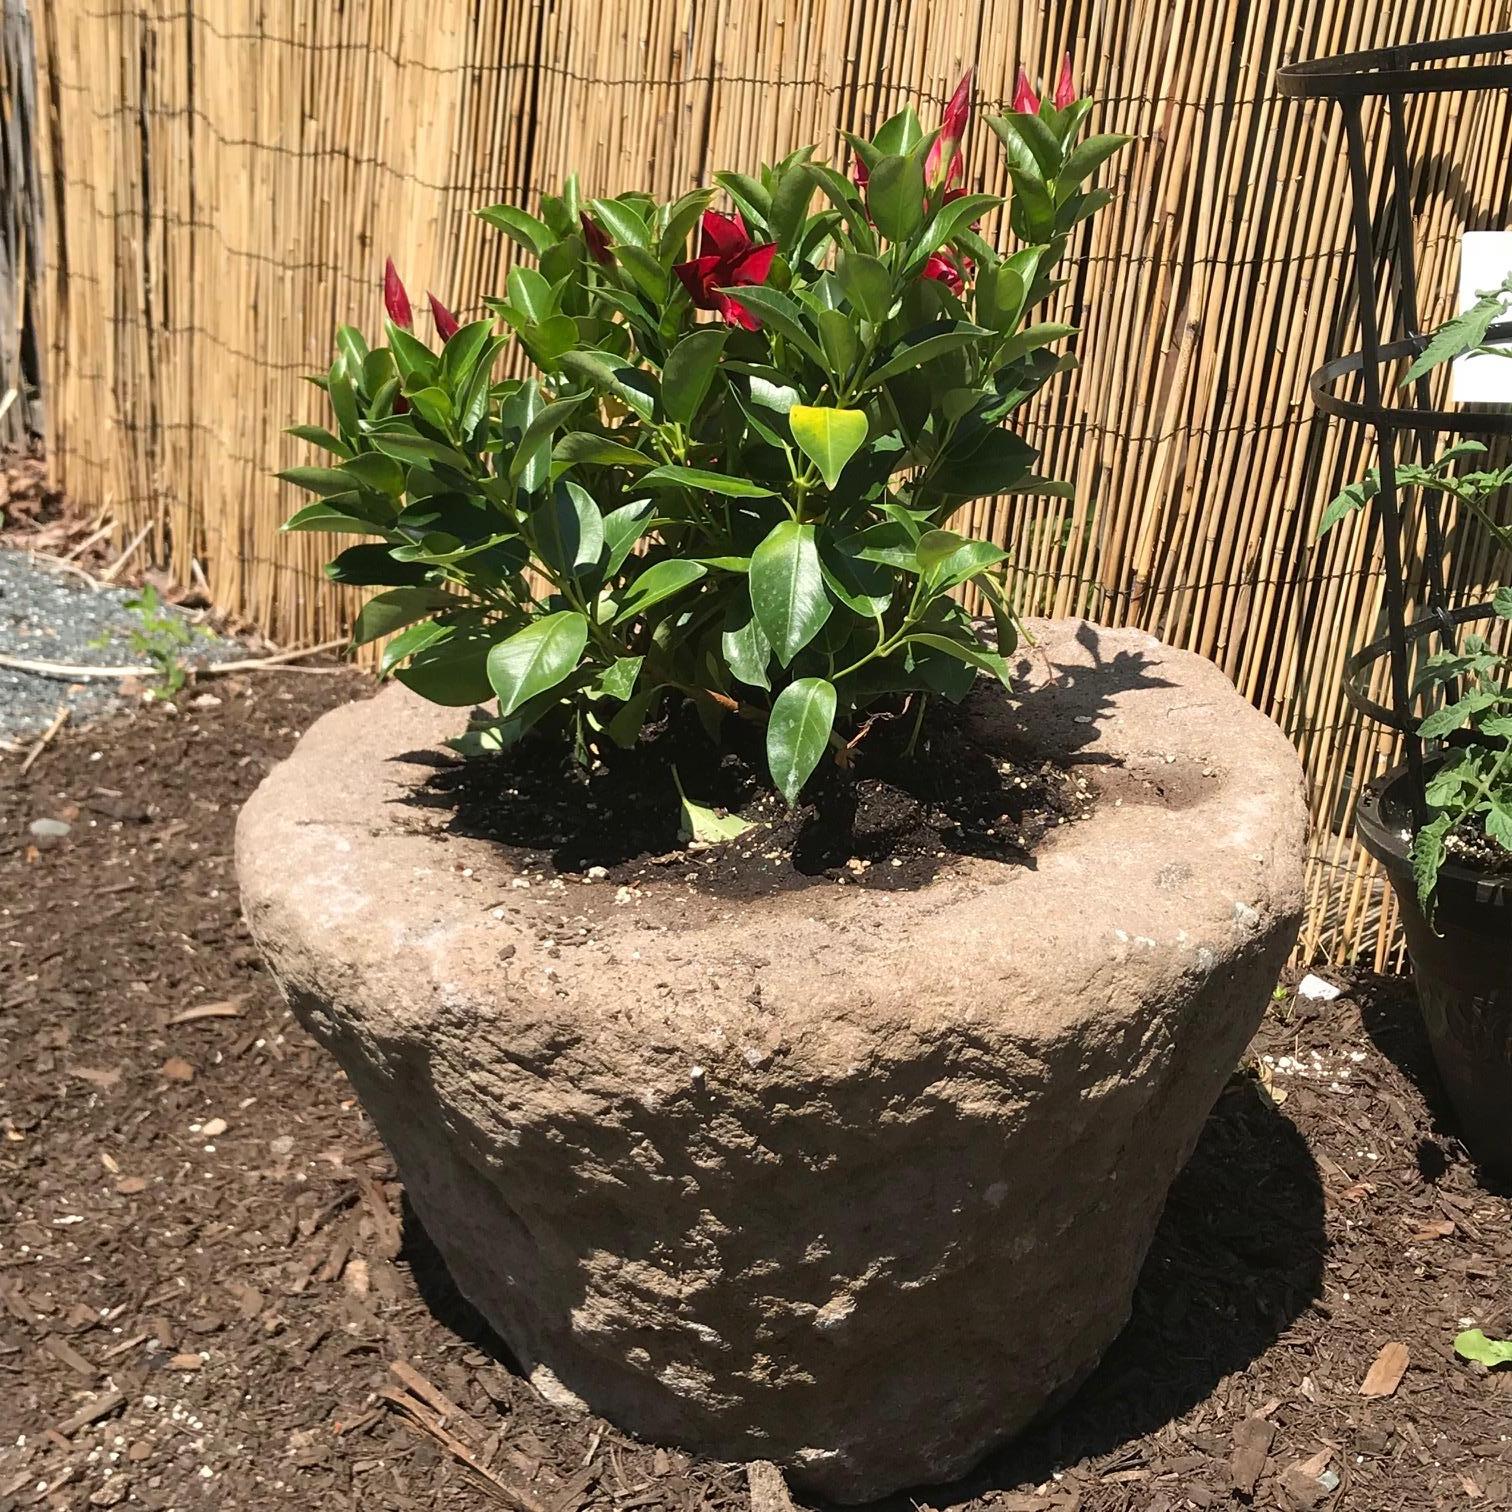 An attractive pair of sturdy hand-carved stone planters and basins in a pleasing elegant and slender cone shape.

These attractive heavy, thick, and well crafted stone planters make excellent accents indoors or outdoors in gardens, patios, or